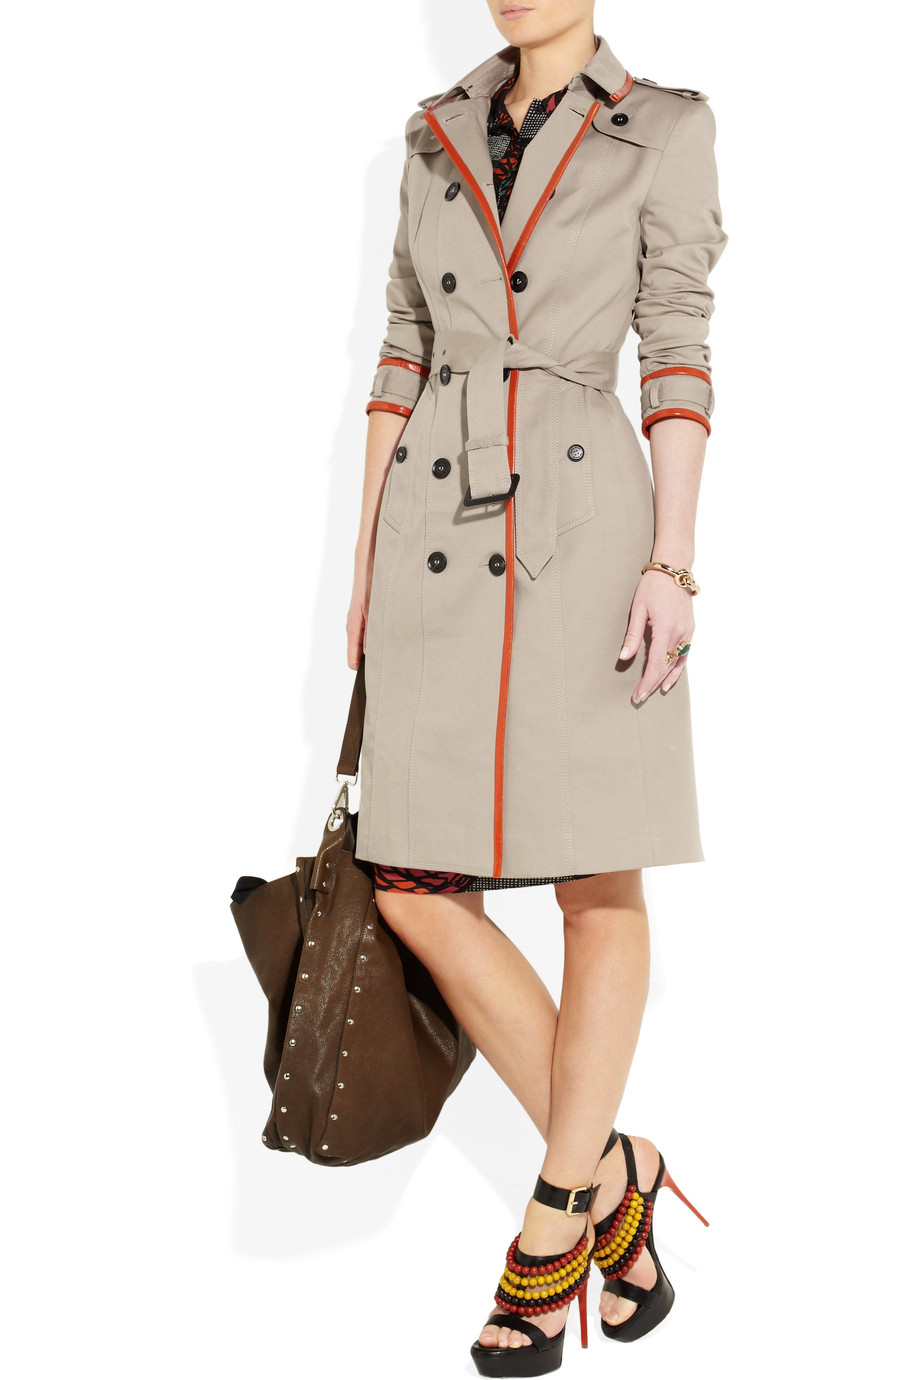 Lyst - Burberry Prorsum Leather-trimmed Cotton-gabardine Trench Coat in ...